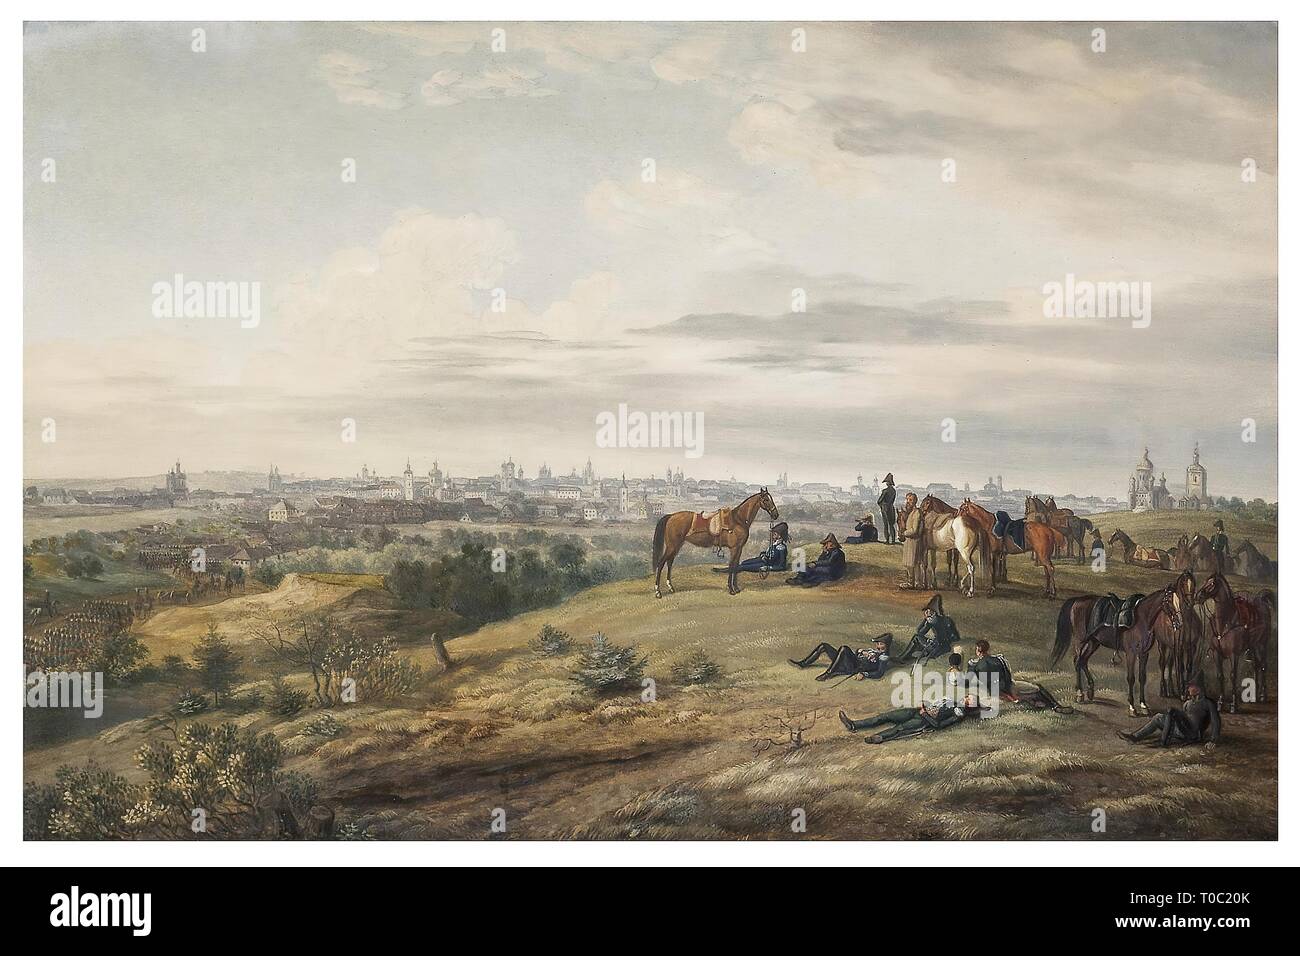 'In the Environs of Viazma on 28 August 1812'. Journal of the 1812 Russian Campaign from Willenberg in Prussia to Moscow of Prince Eugene de Beauharnais, Viceroy of Italy. Germany, Between 1815 and 1825. Dimensions: 21x30 cm. Museum: State Hermitage, St. Petersburg. Author: ALBRECHT ADAM. Stock Photo